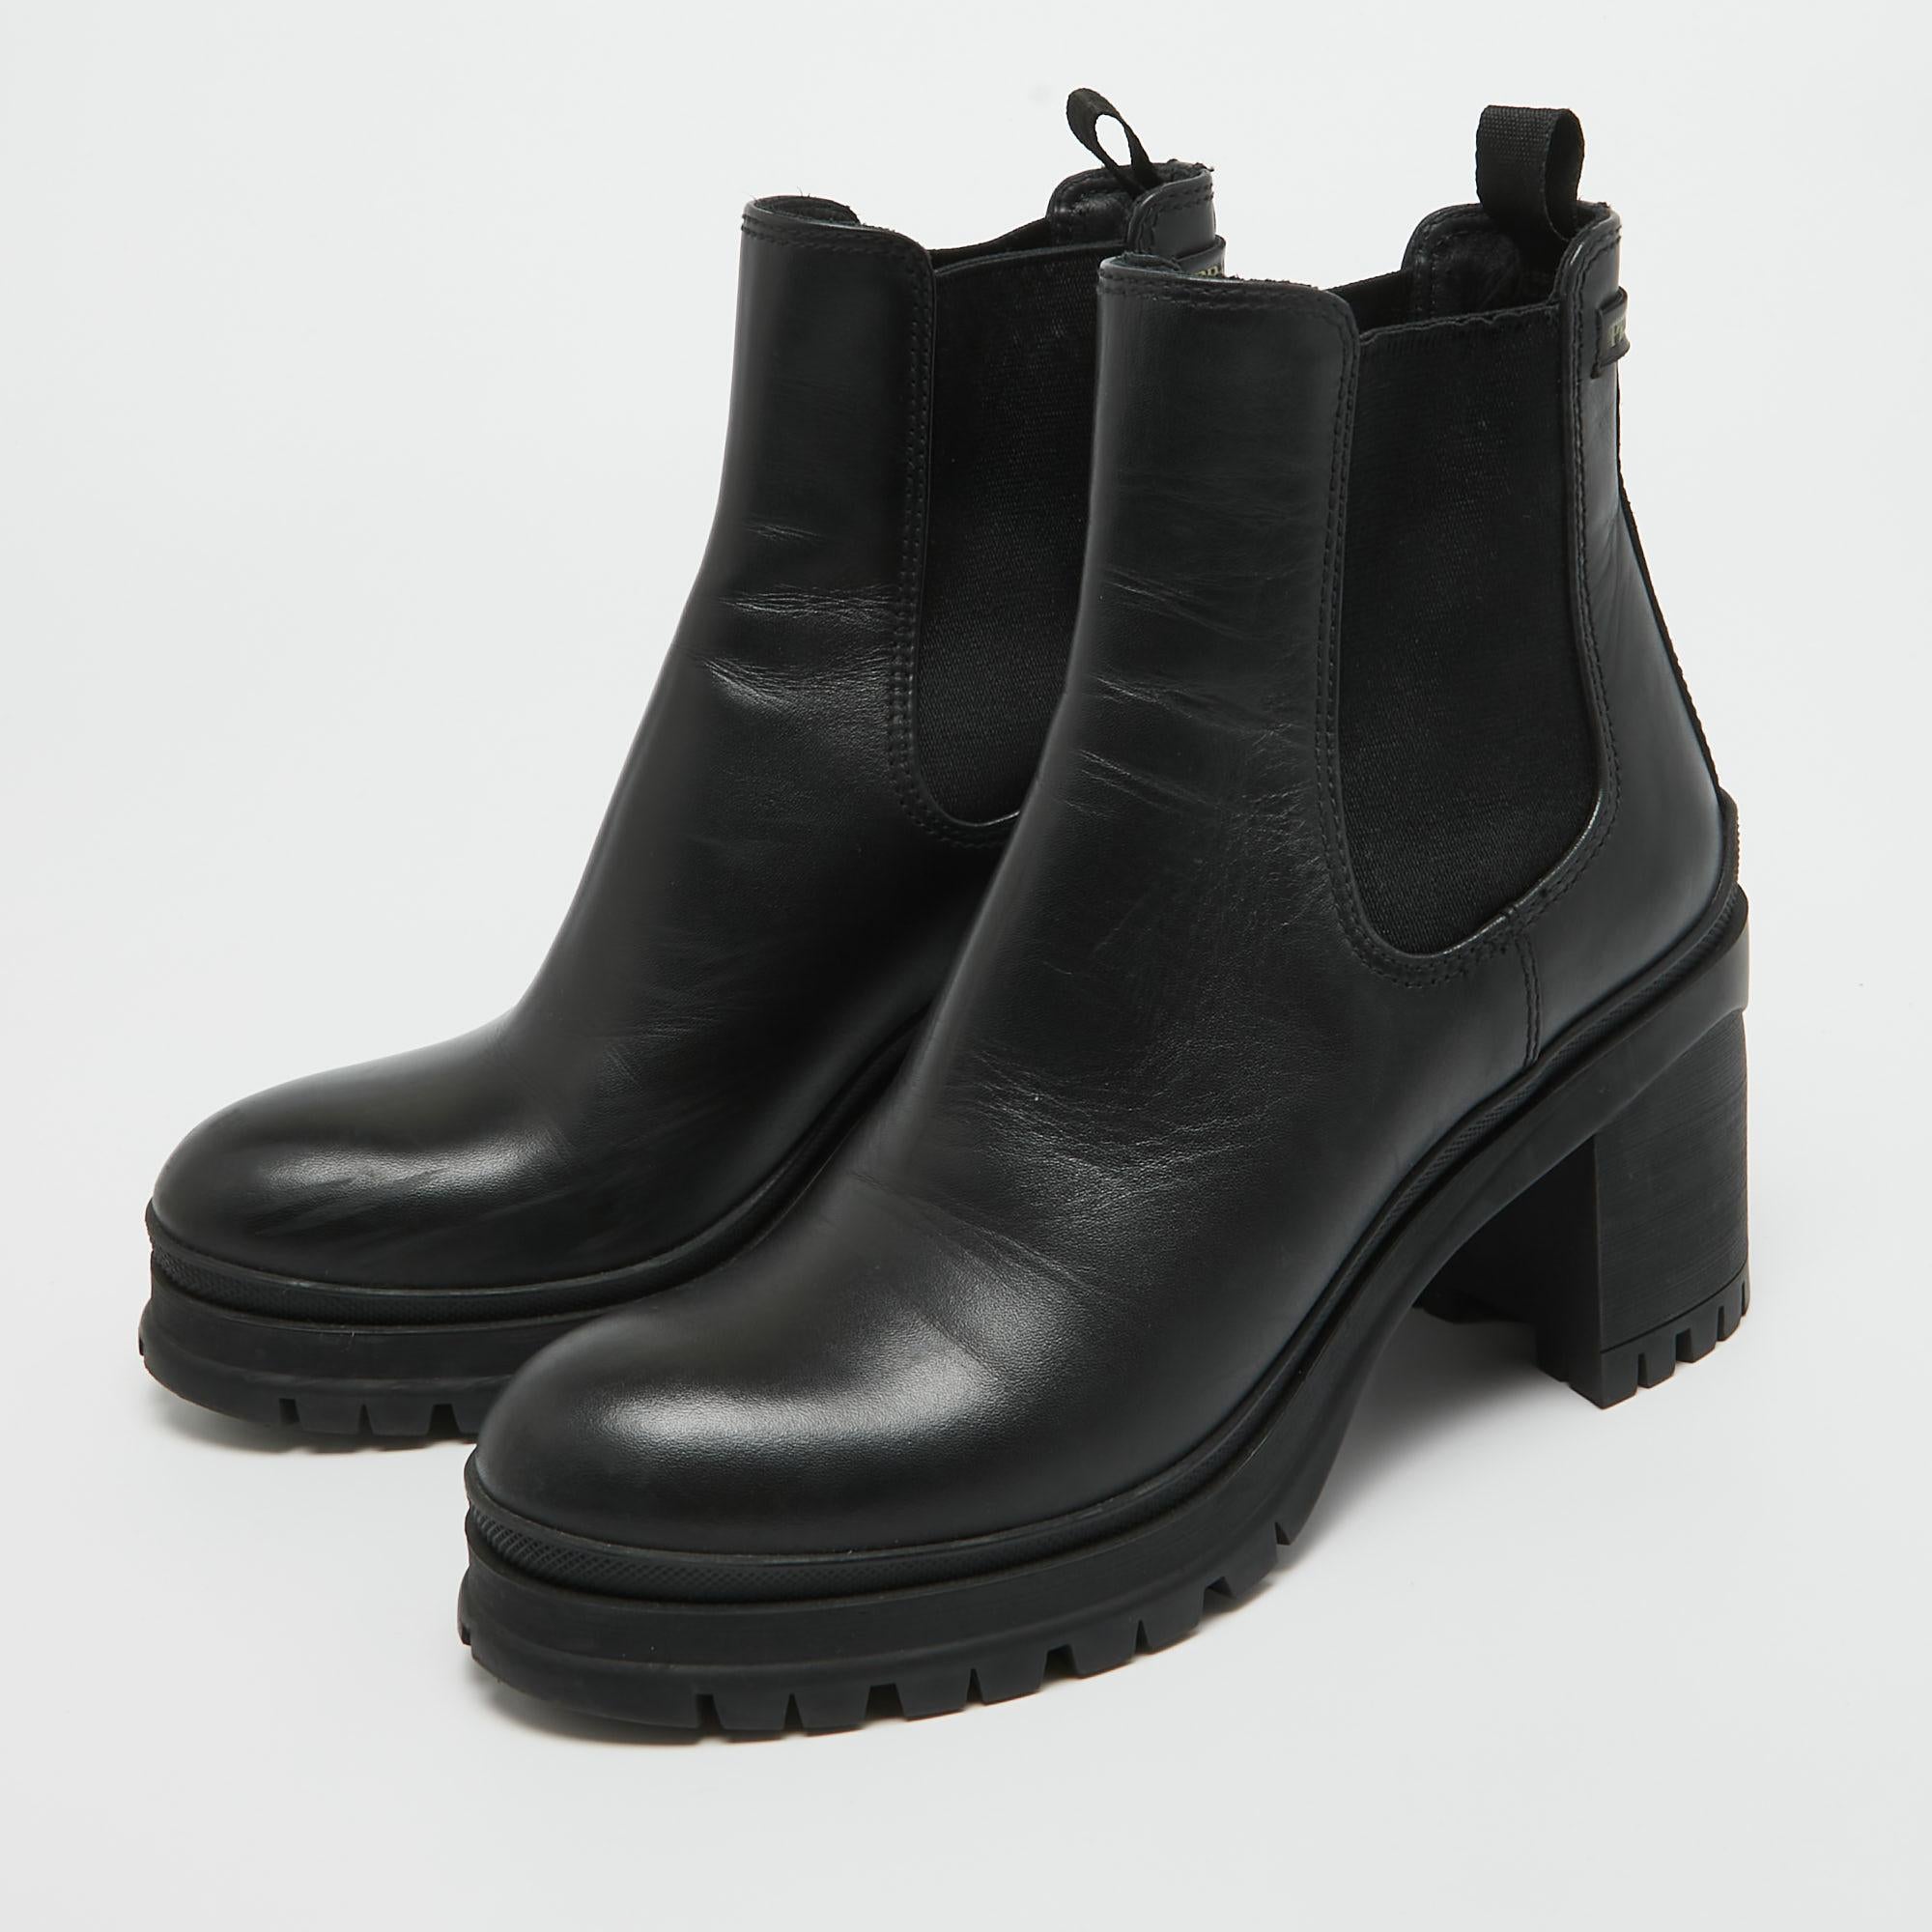 Prada Black Leather Ankle Length Boots Size 38.5 For Sale 3